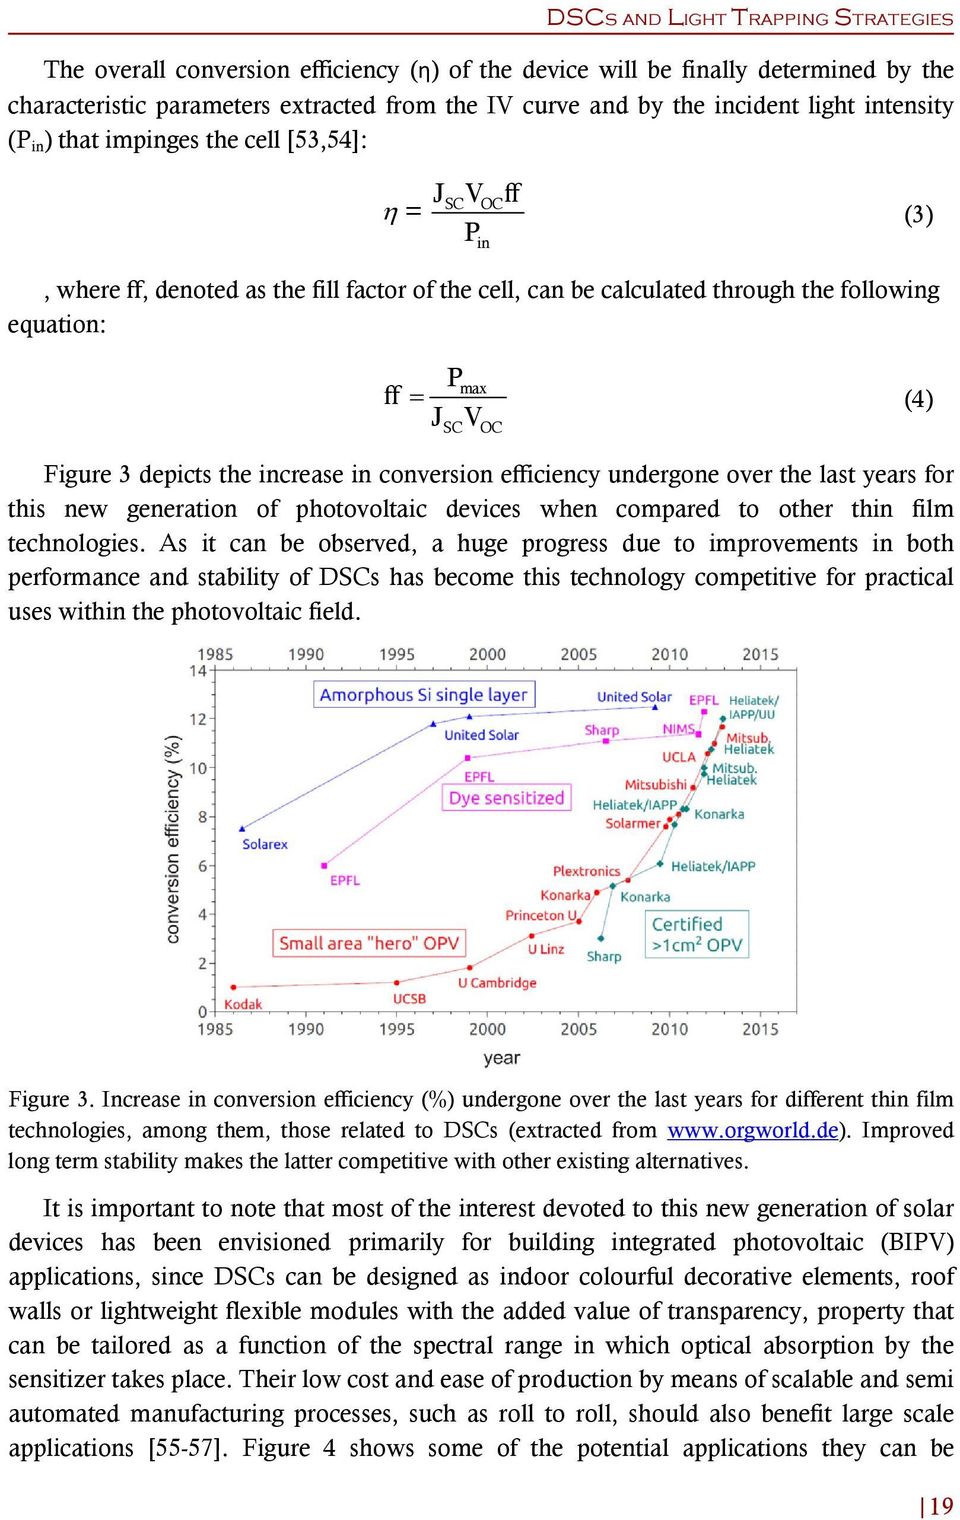 OC Figure 3 depicts the increase in conversion efficiency undergone over the last years for this new generation of photovoltaic devices when compared to other thin film technologies.